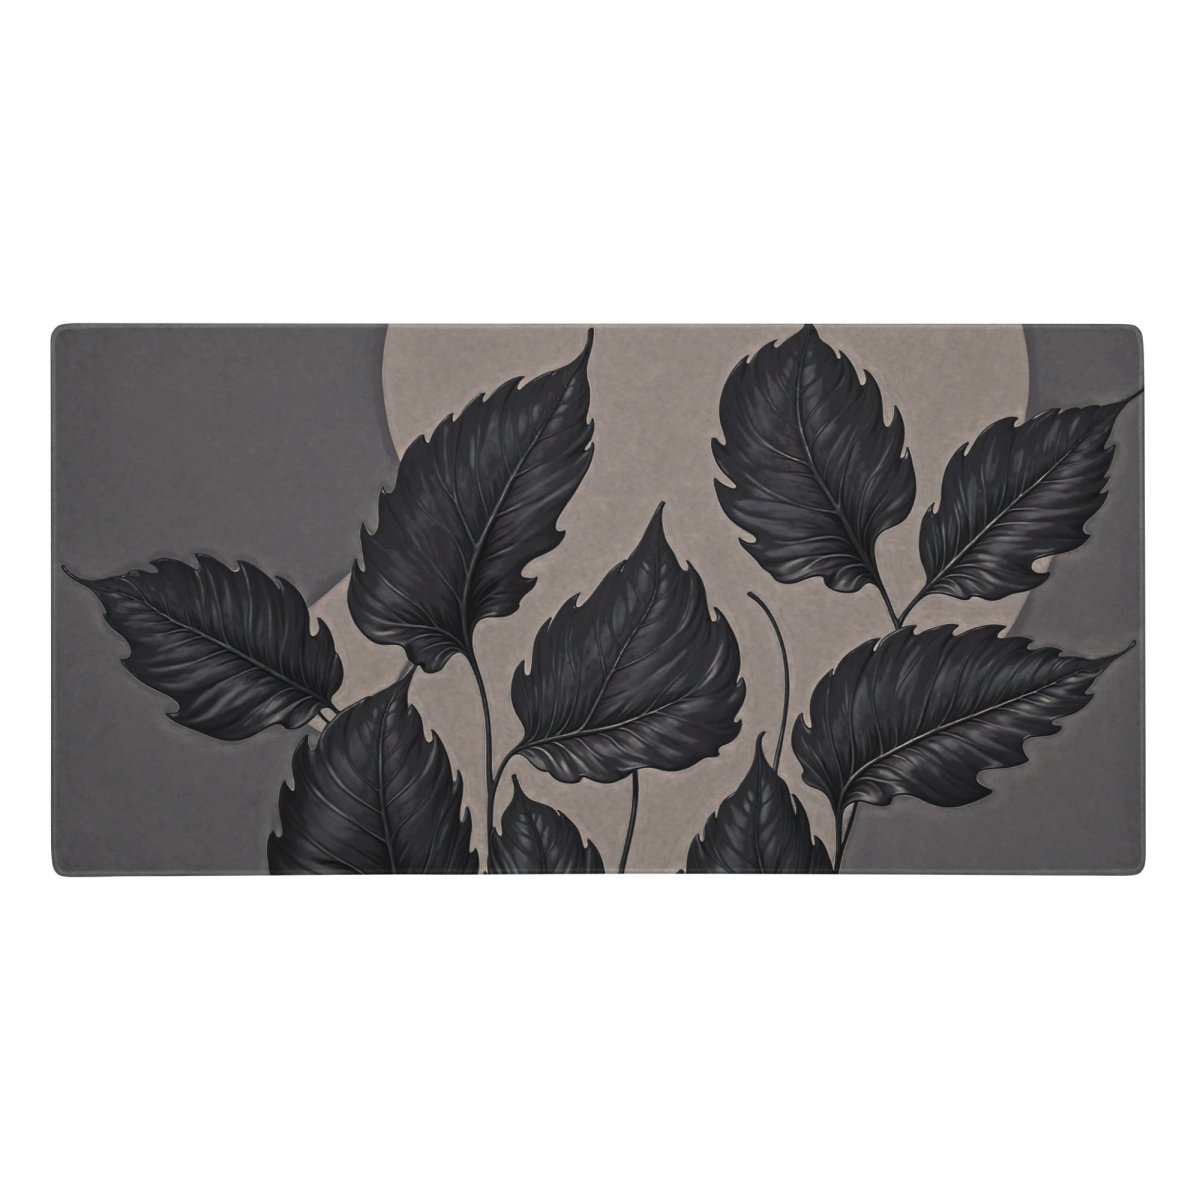 Charcoal leaf - Gaming mouse pad - Ever colorful